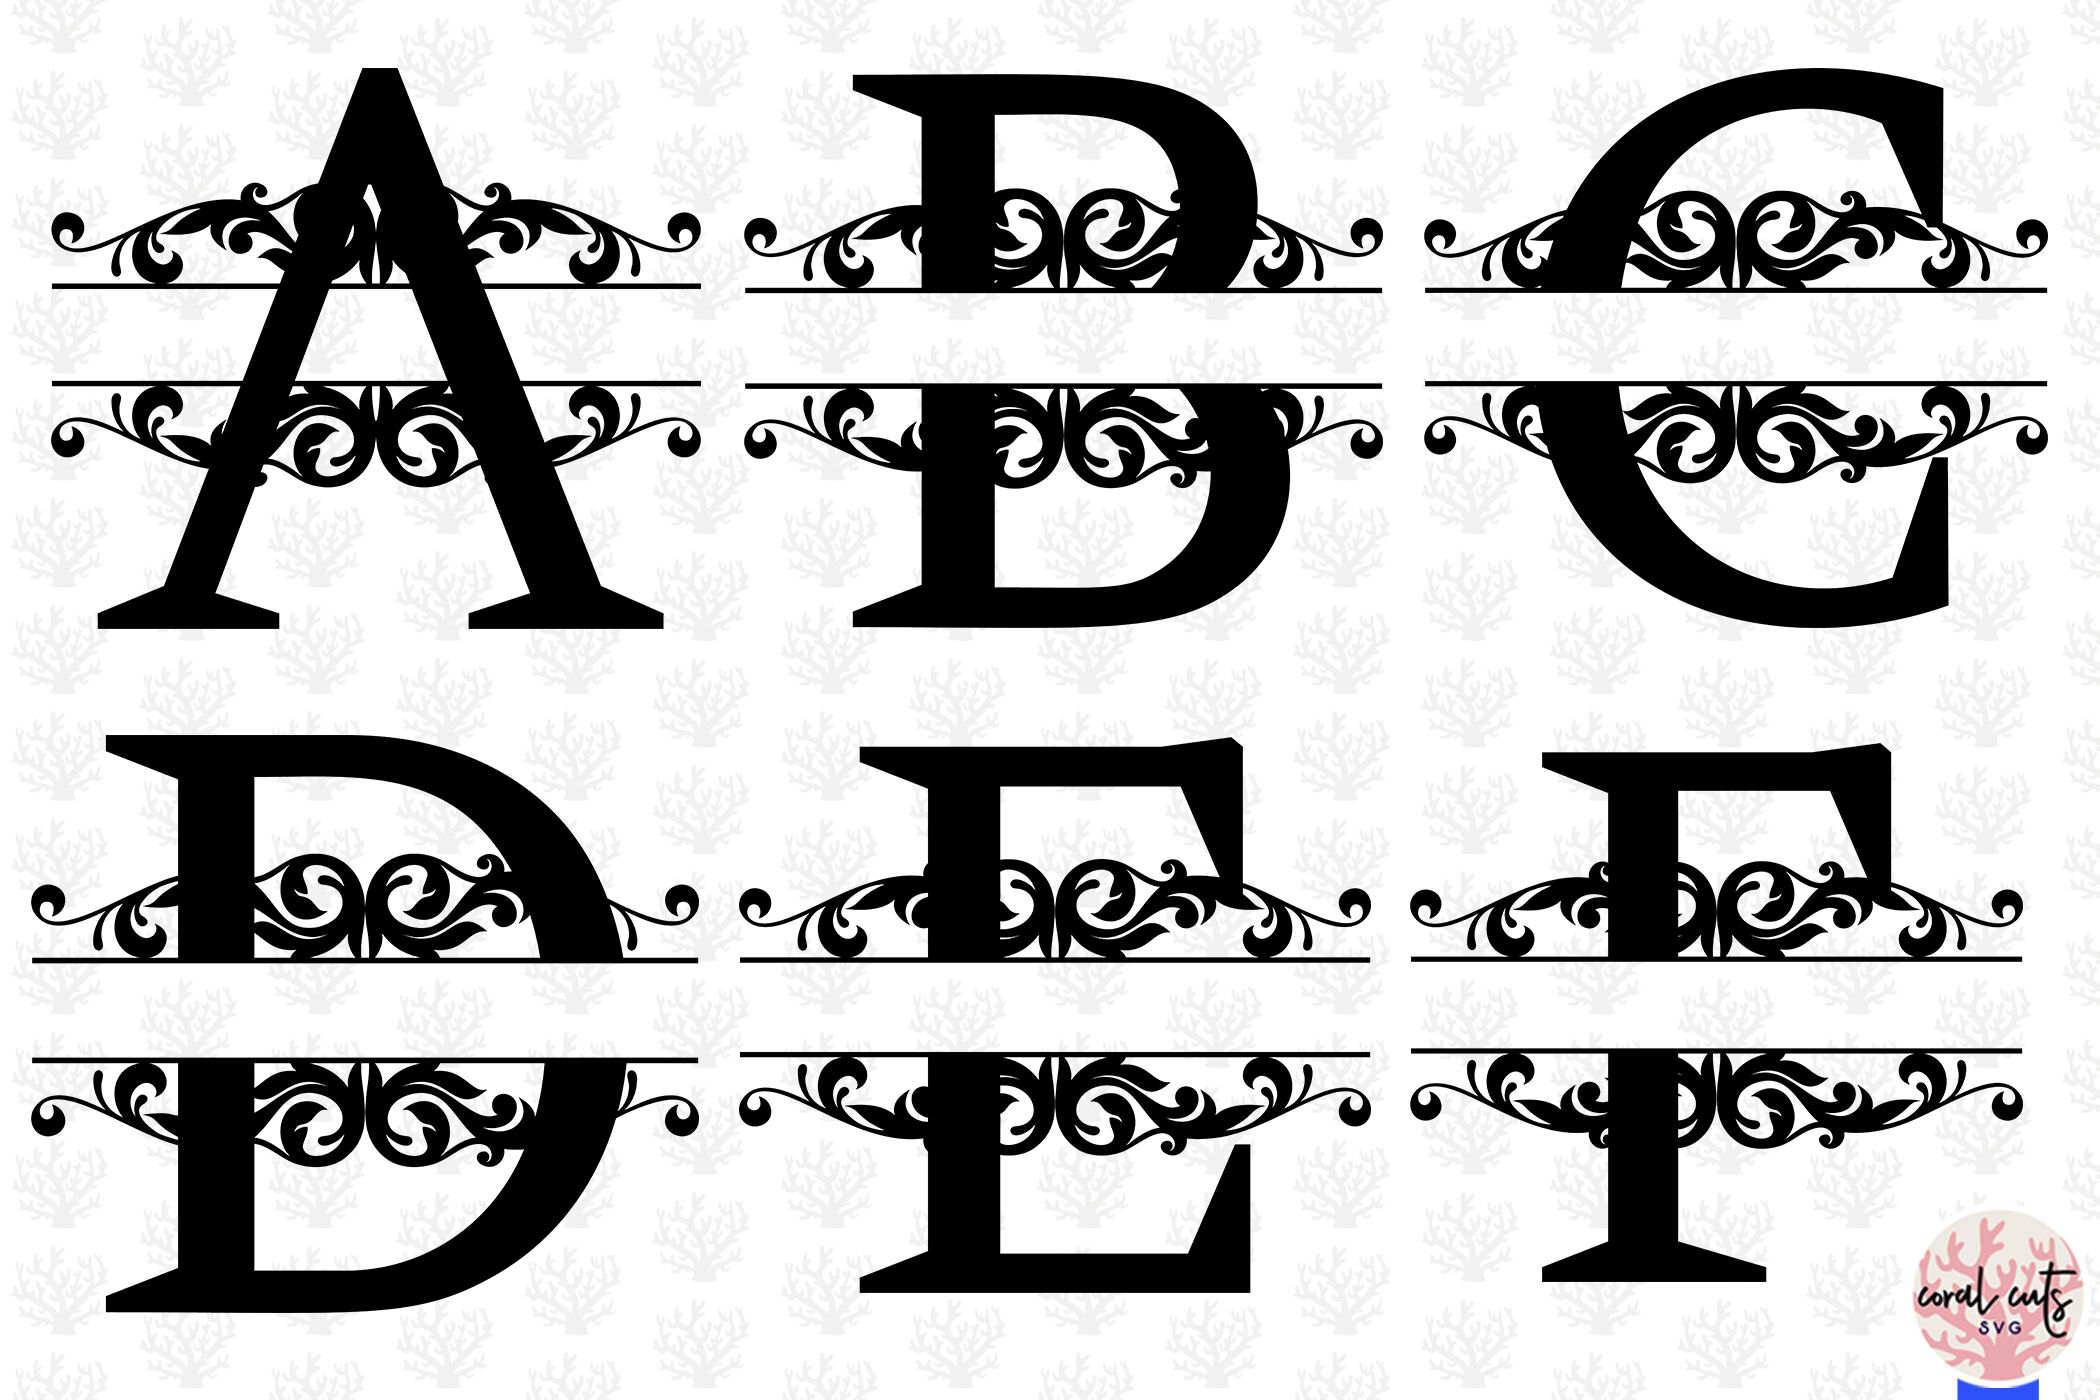 Download Split Letters Monogram A to Z - Svg EPS DXF PNG File By ...